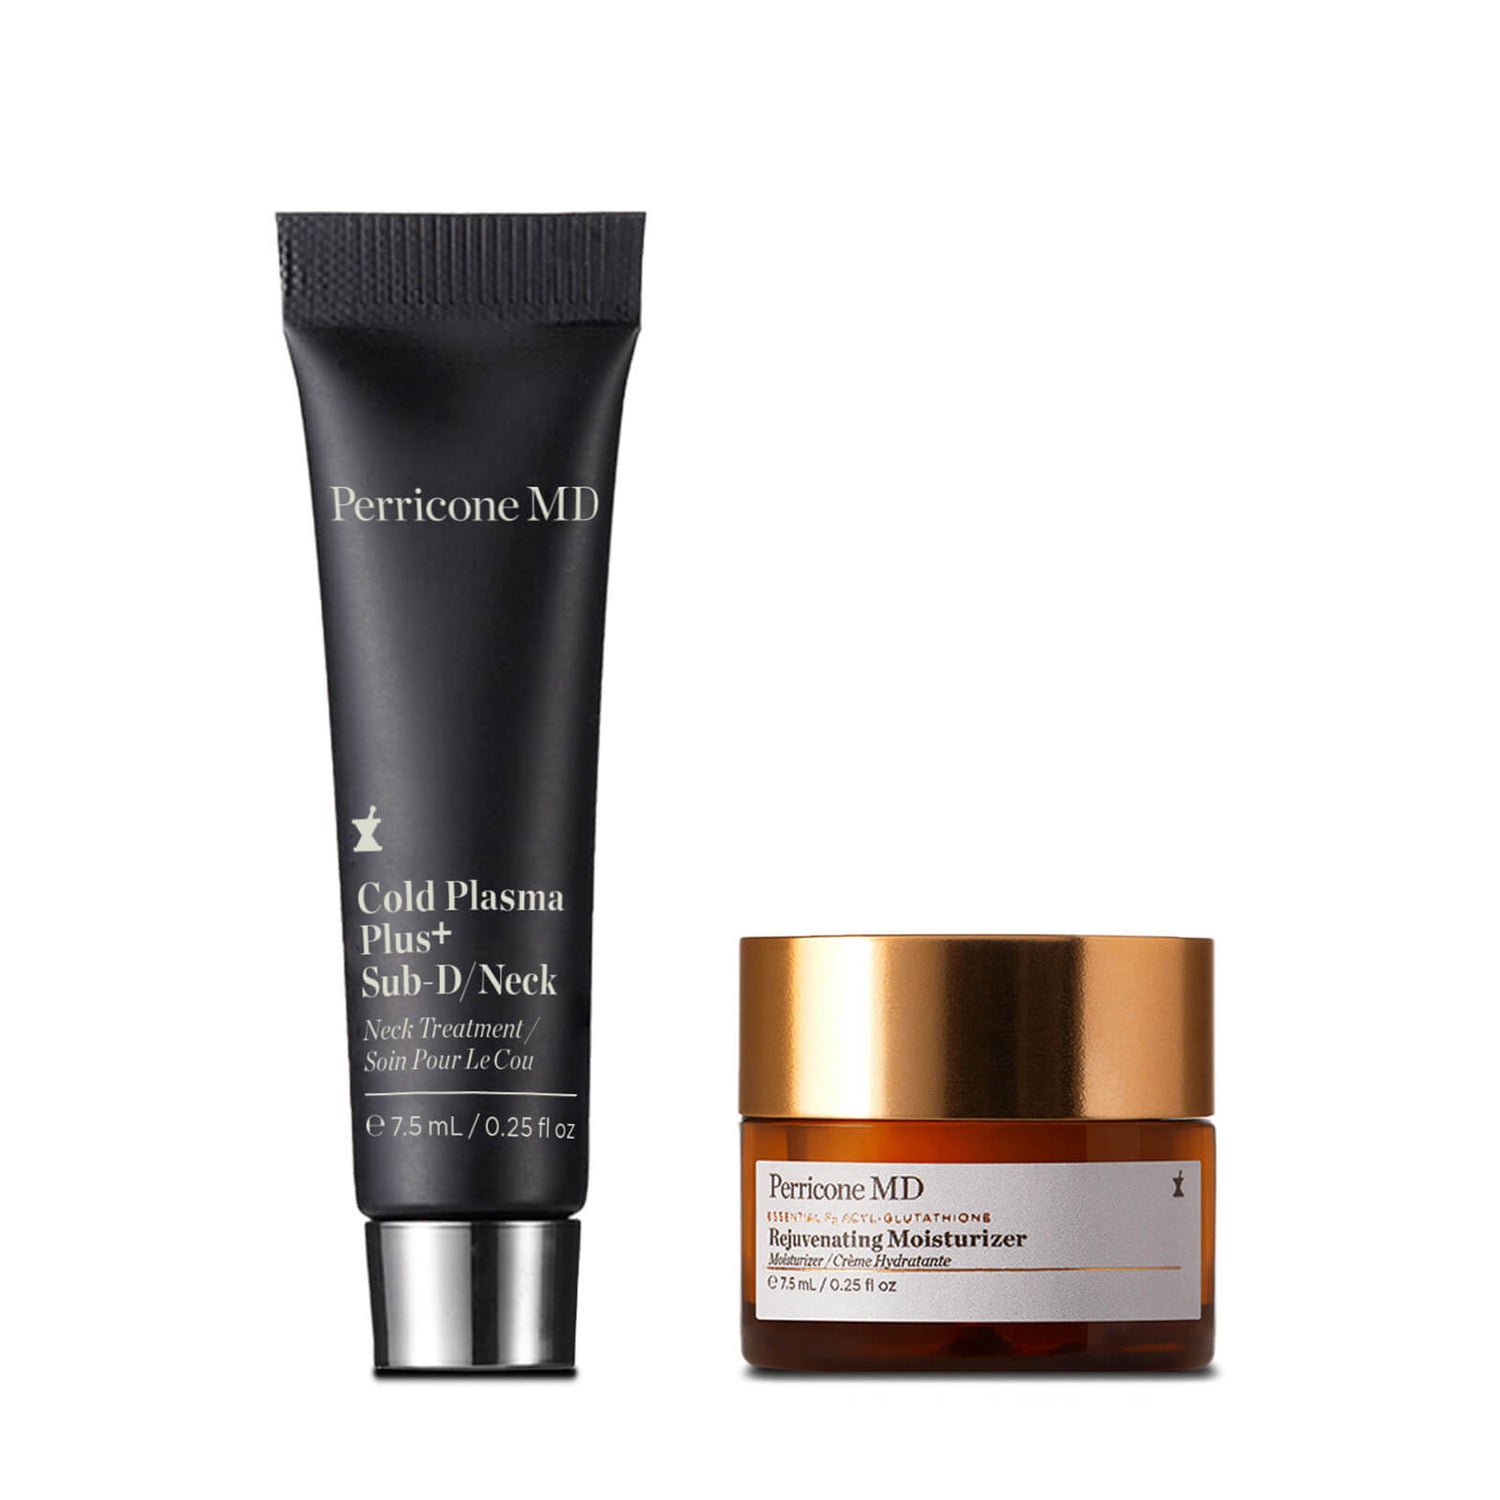 Perricone MD Luxe Face and Neck Duo